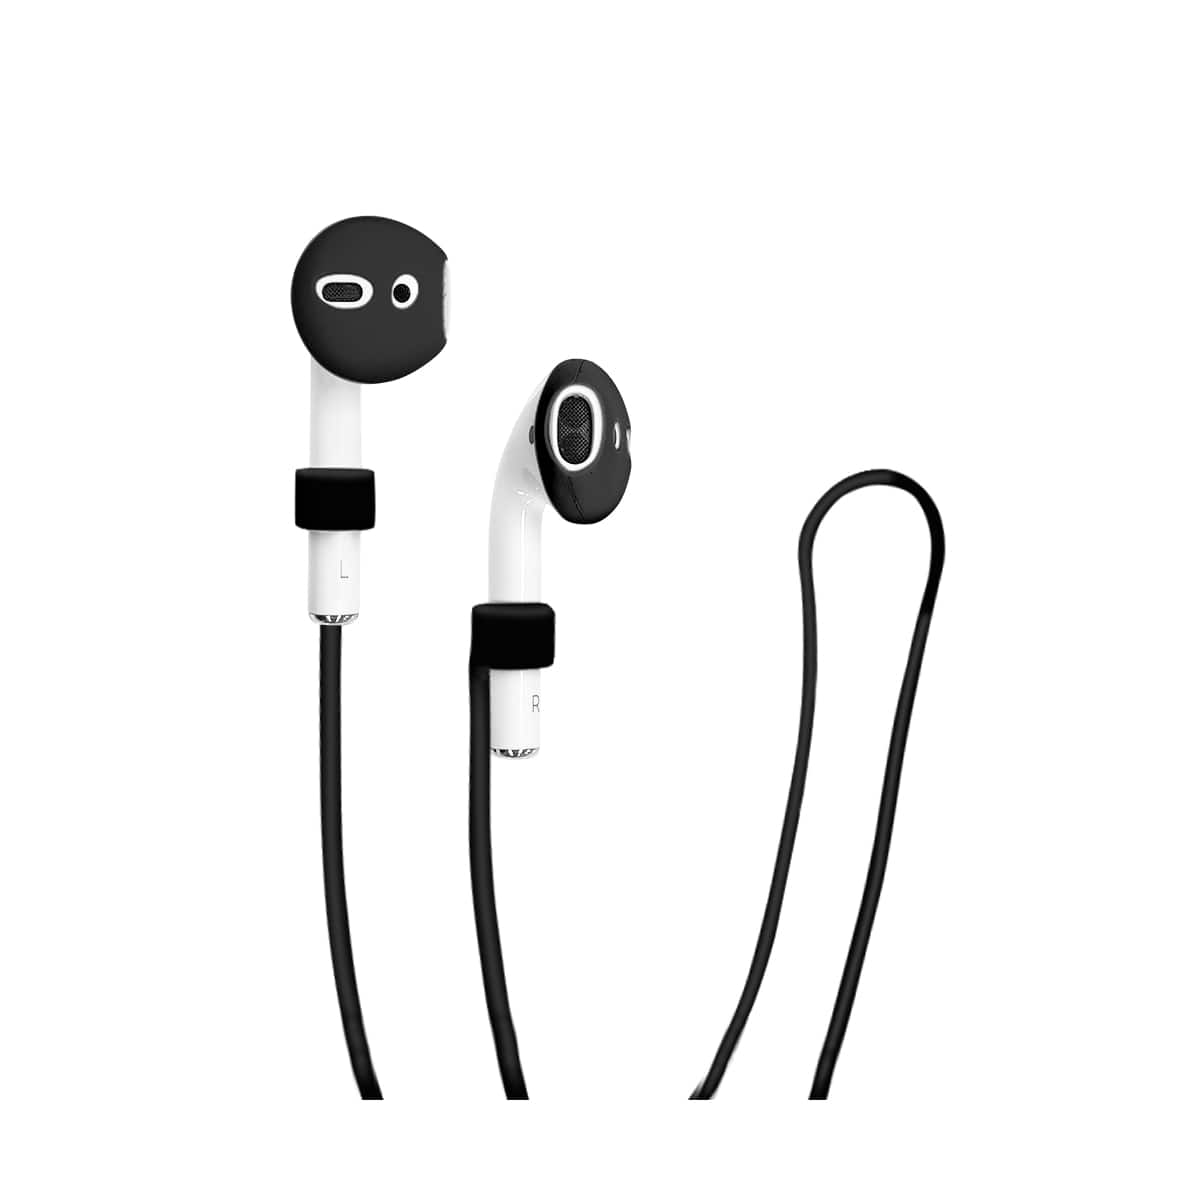 AirPods pro 2個セット